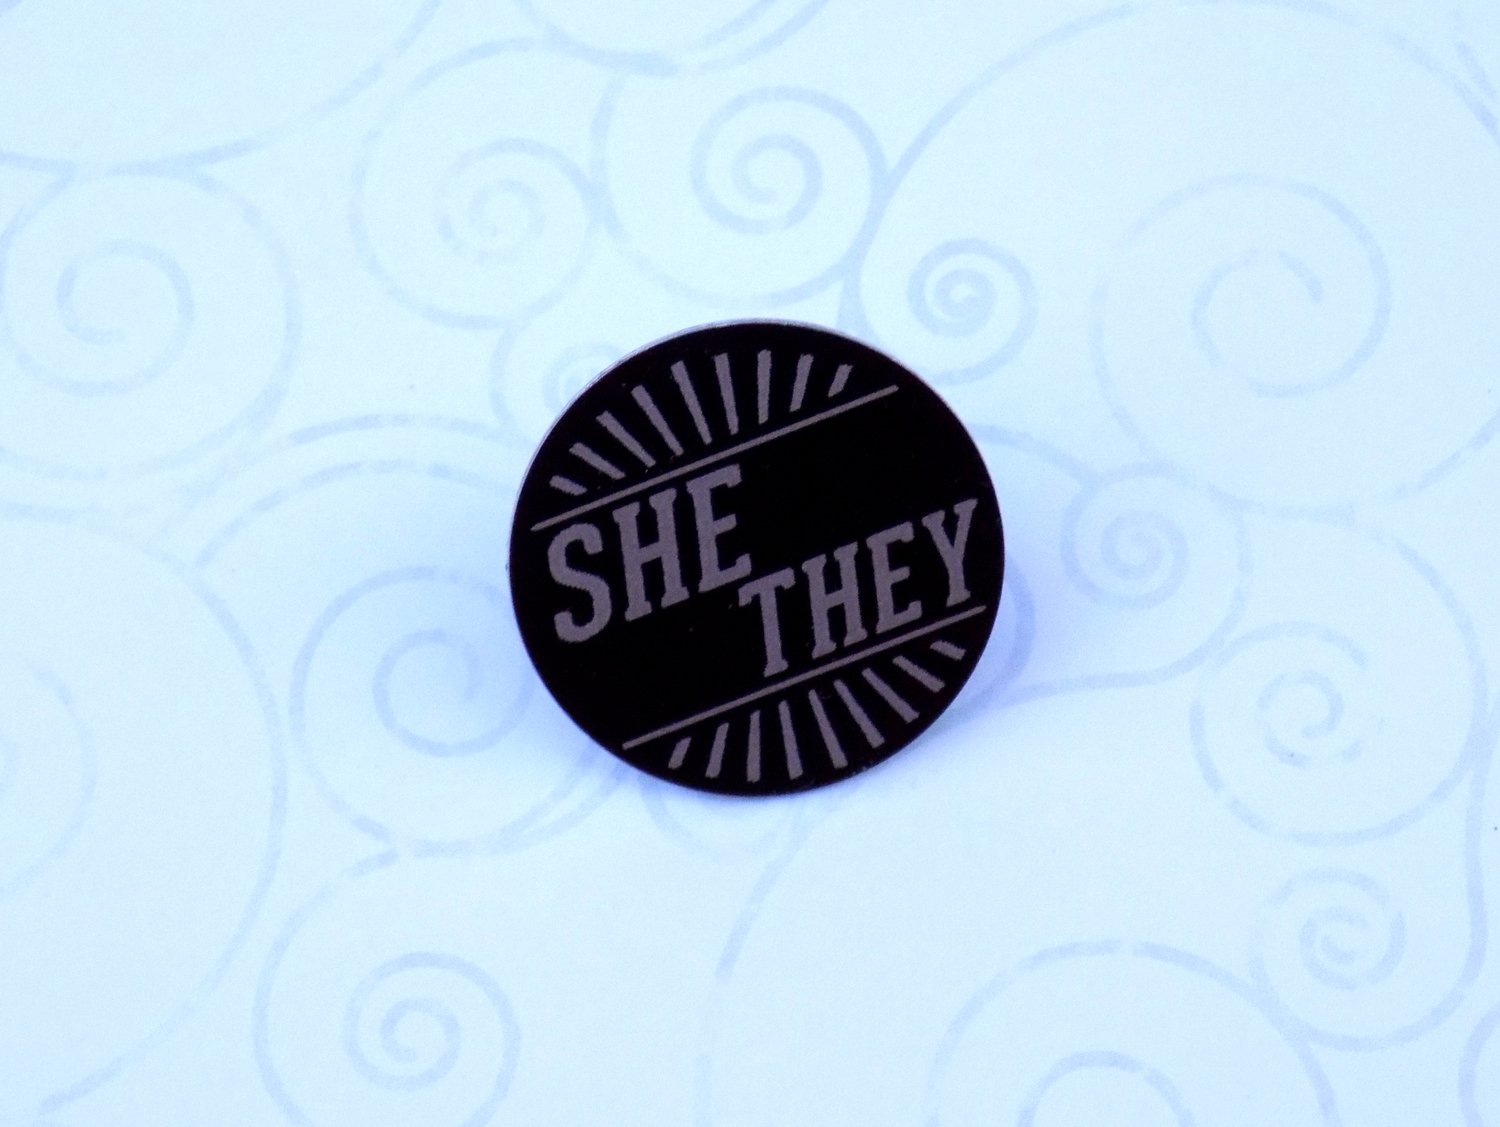 She/They Art Deco Pronoun Pin (Pay What You Can)